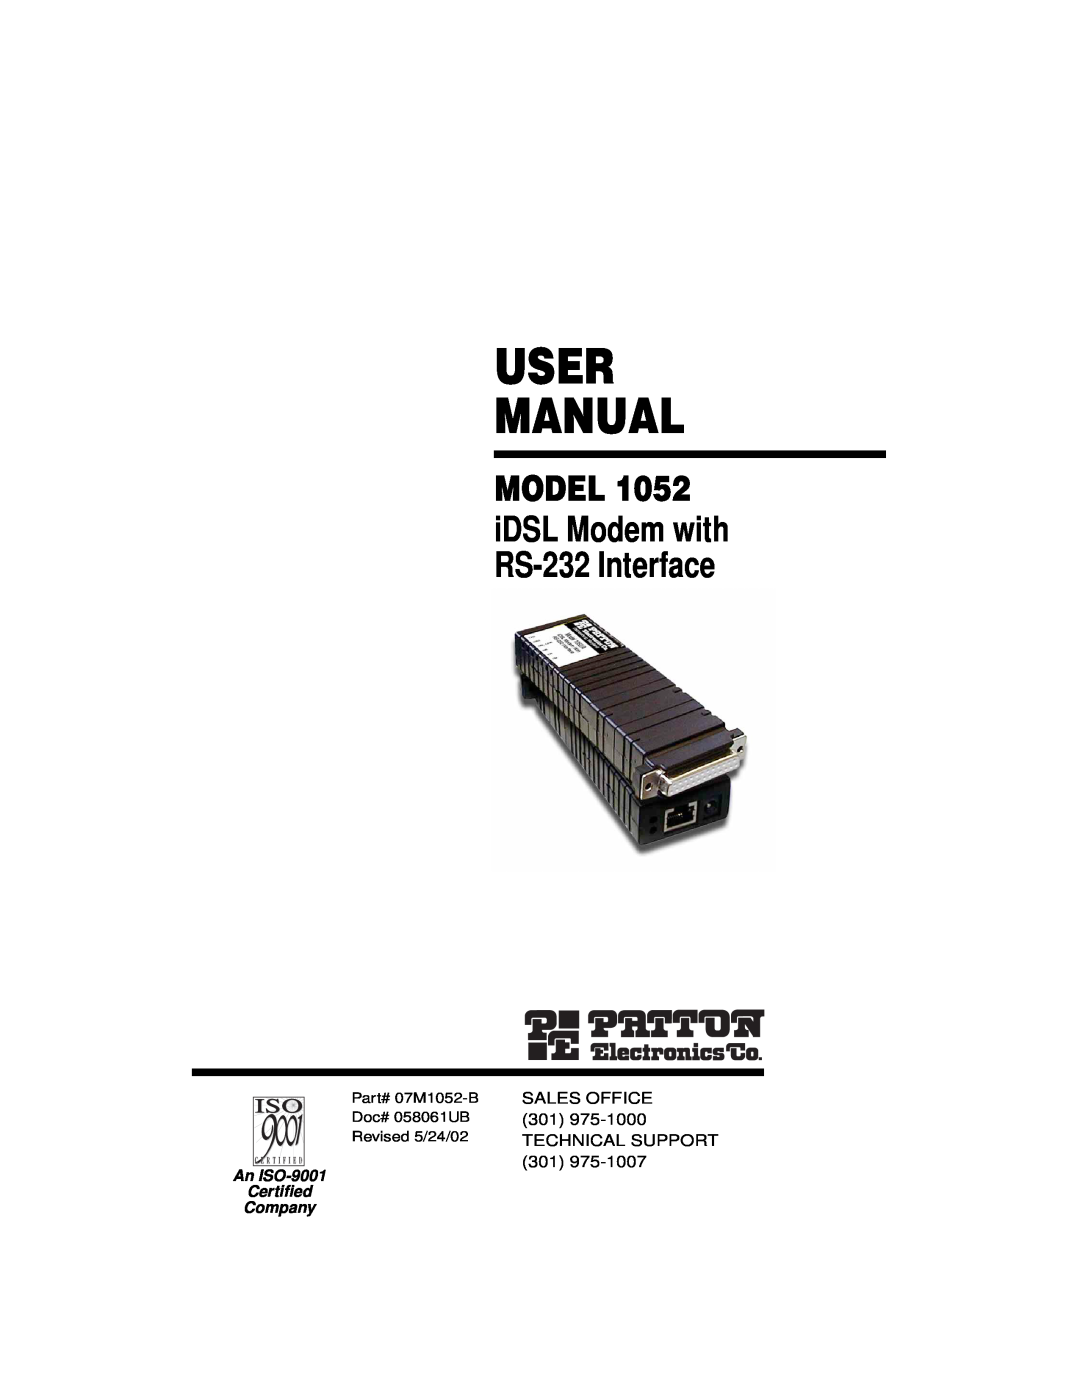 Patton electronic 1052 user manual User Manual, Model, iDSL Modem with RS-232 Interface, An ISO-9001 Certiﬁed Company 